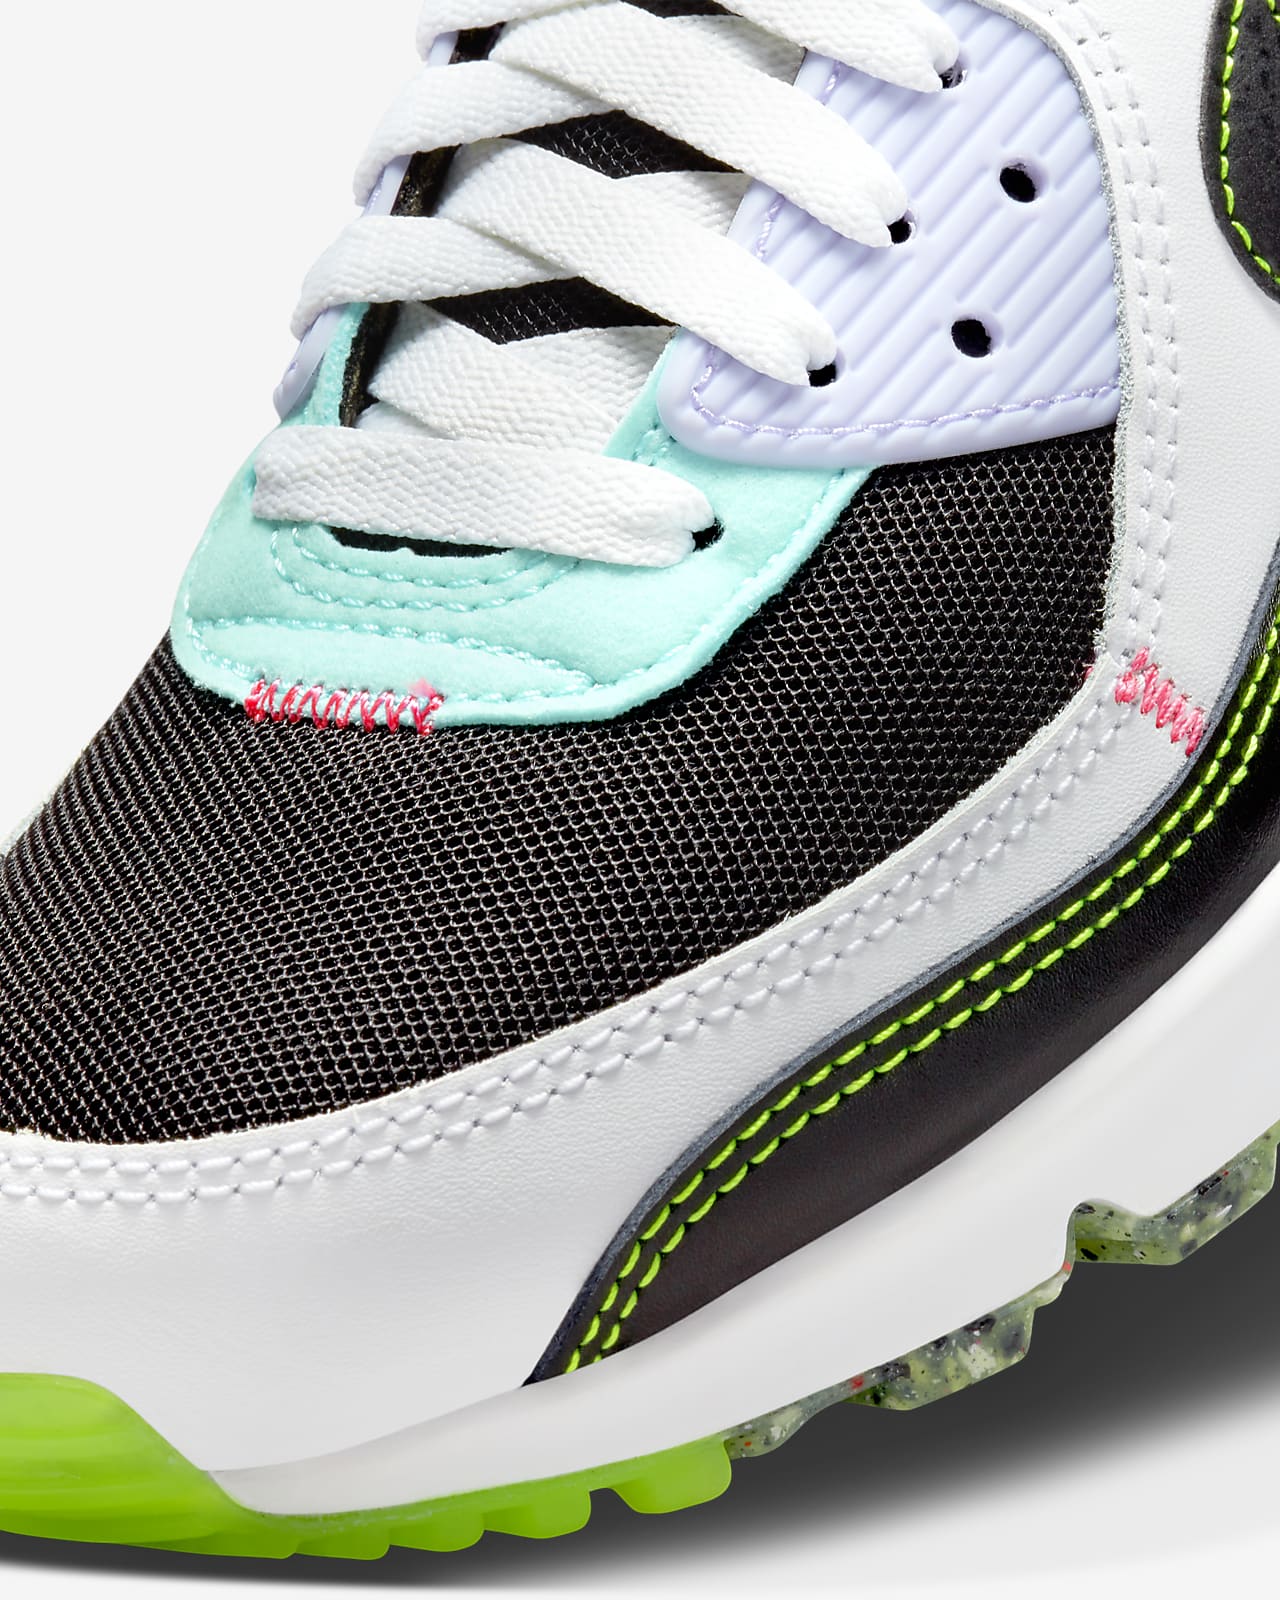 Nike Air Max 90 Exeter Edition Women's Shoes